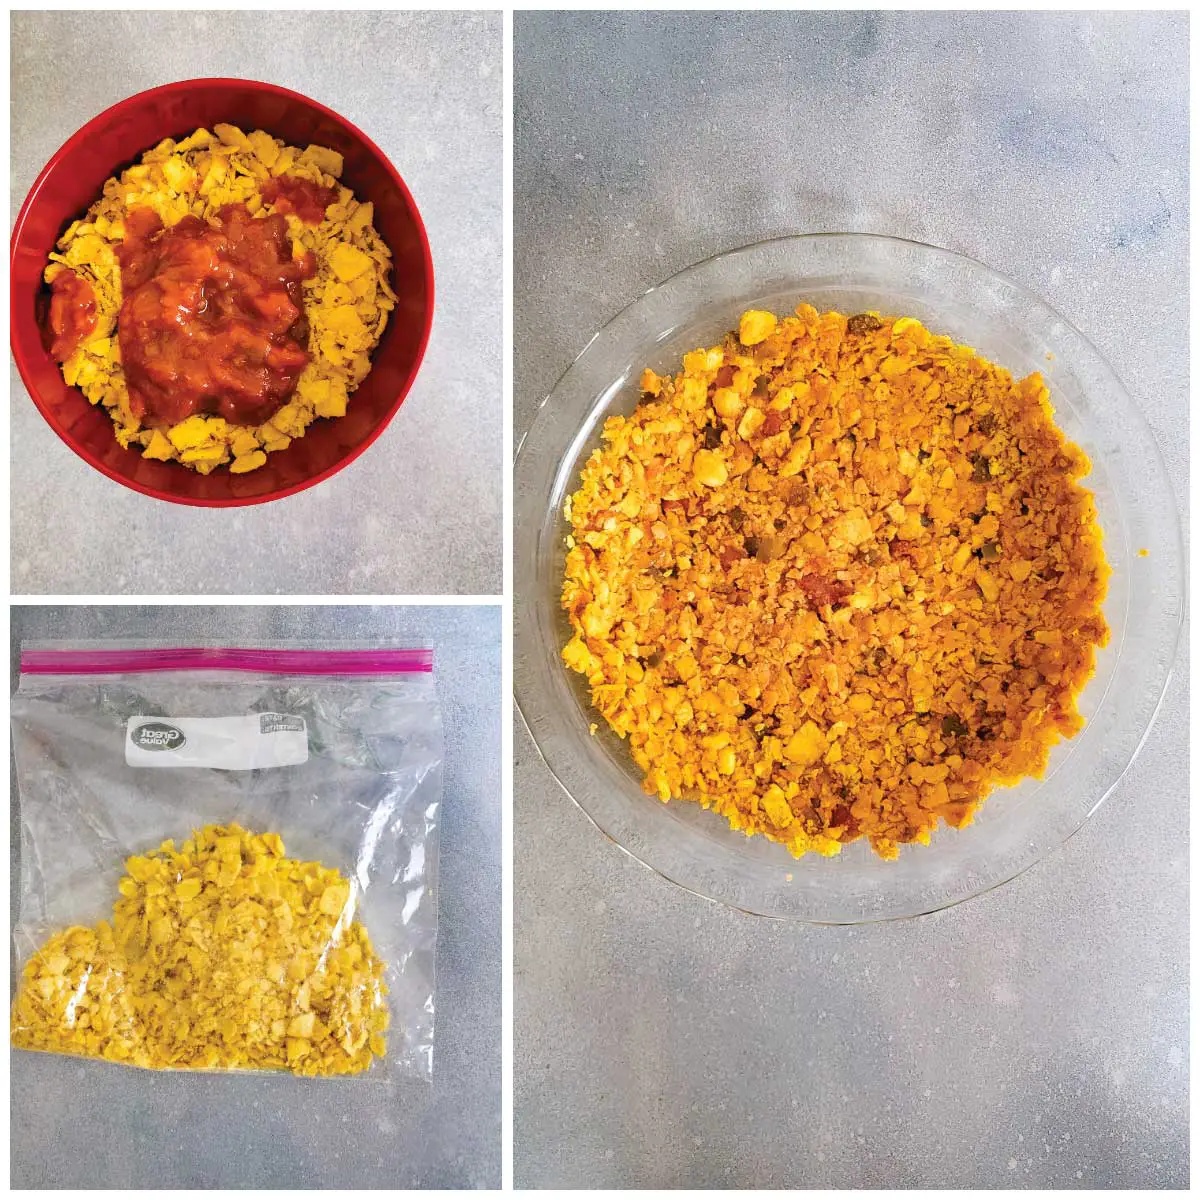 Steps for making the crust - crushed corn chips, adding the salsa to the chips and pressing the mixture down into a pie dish.